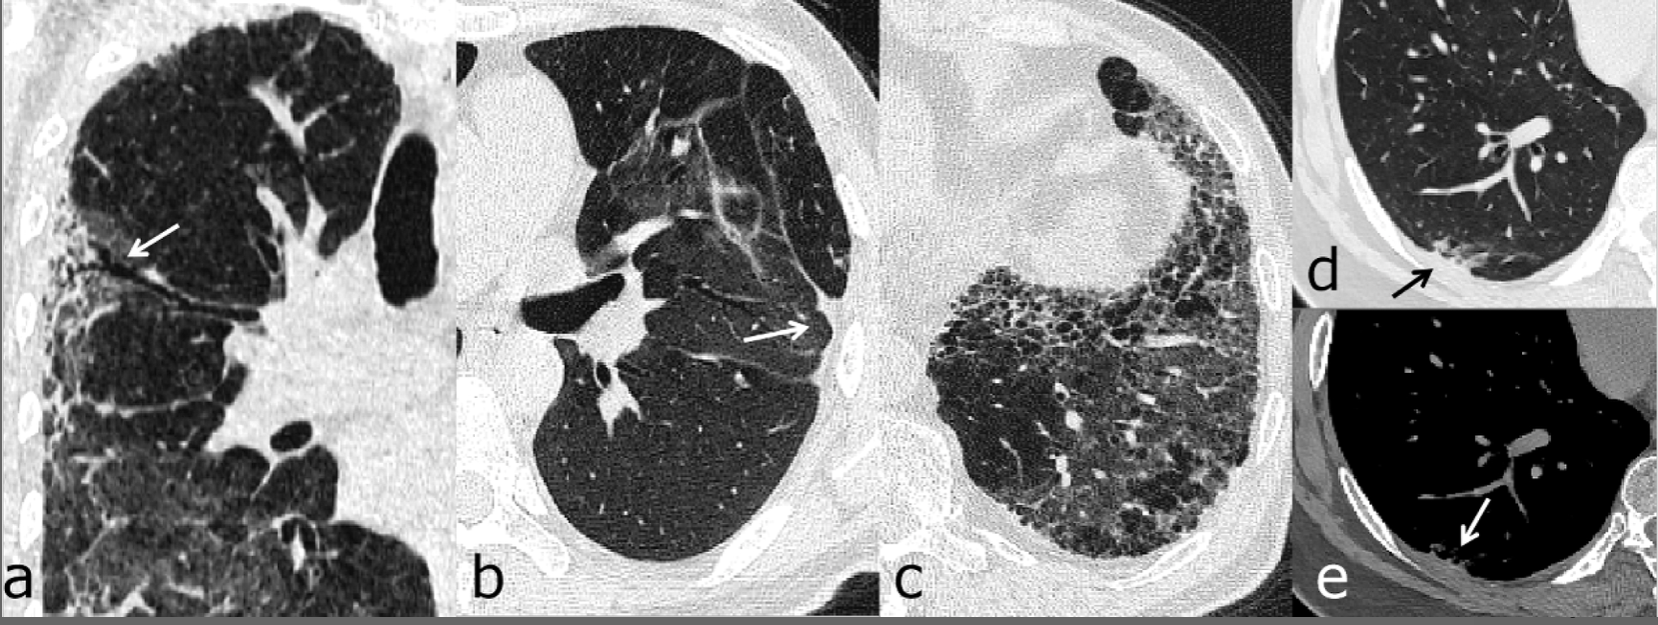 Post-COVID-19, CT Reveals Potentially Lifetime Lung Damage in One-Thirds of Patients